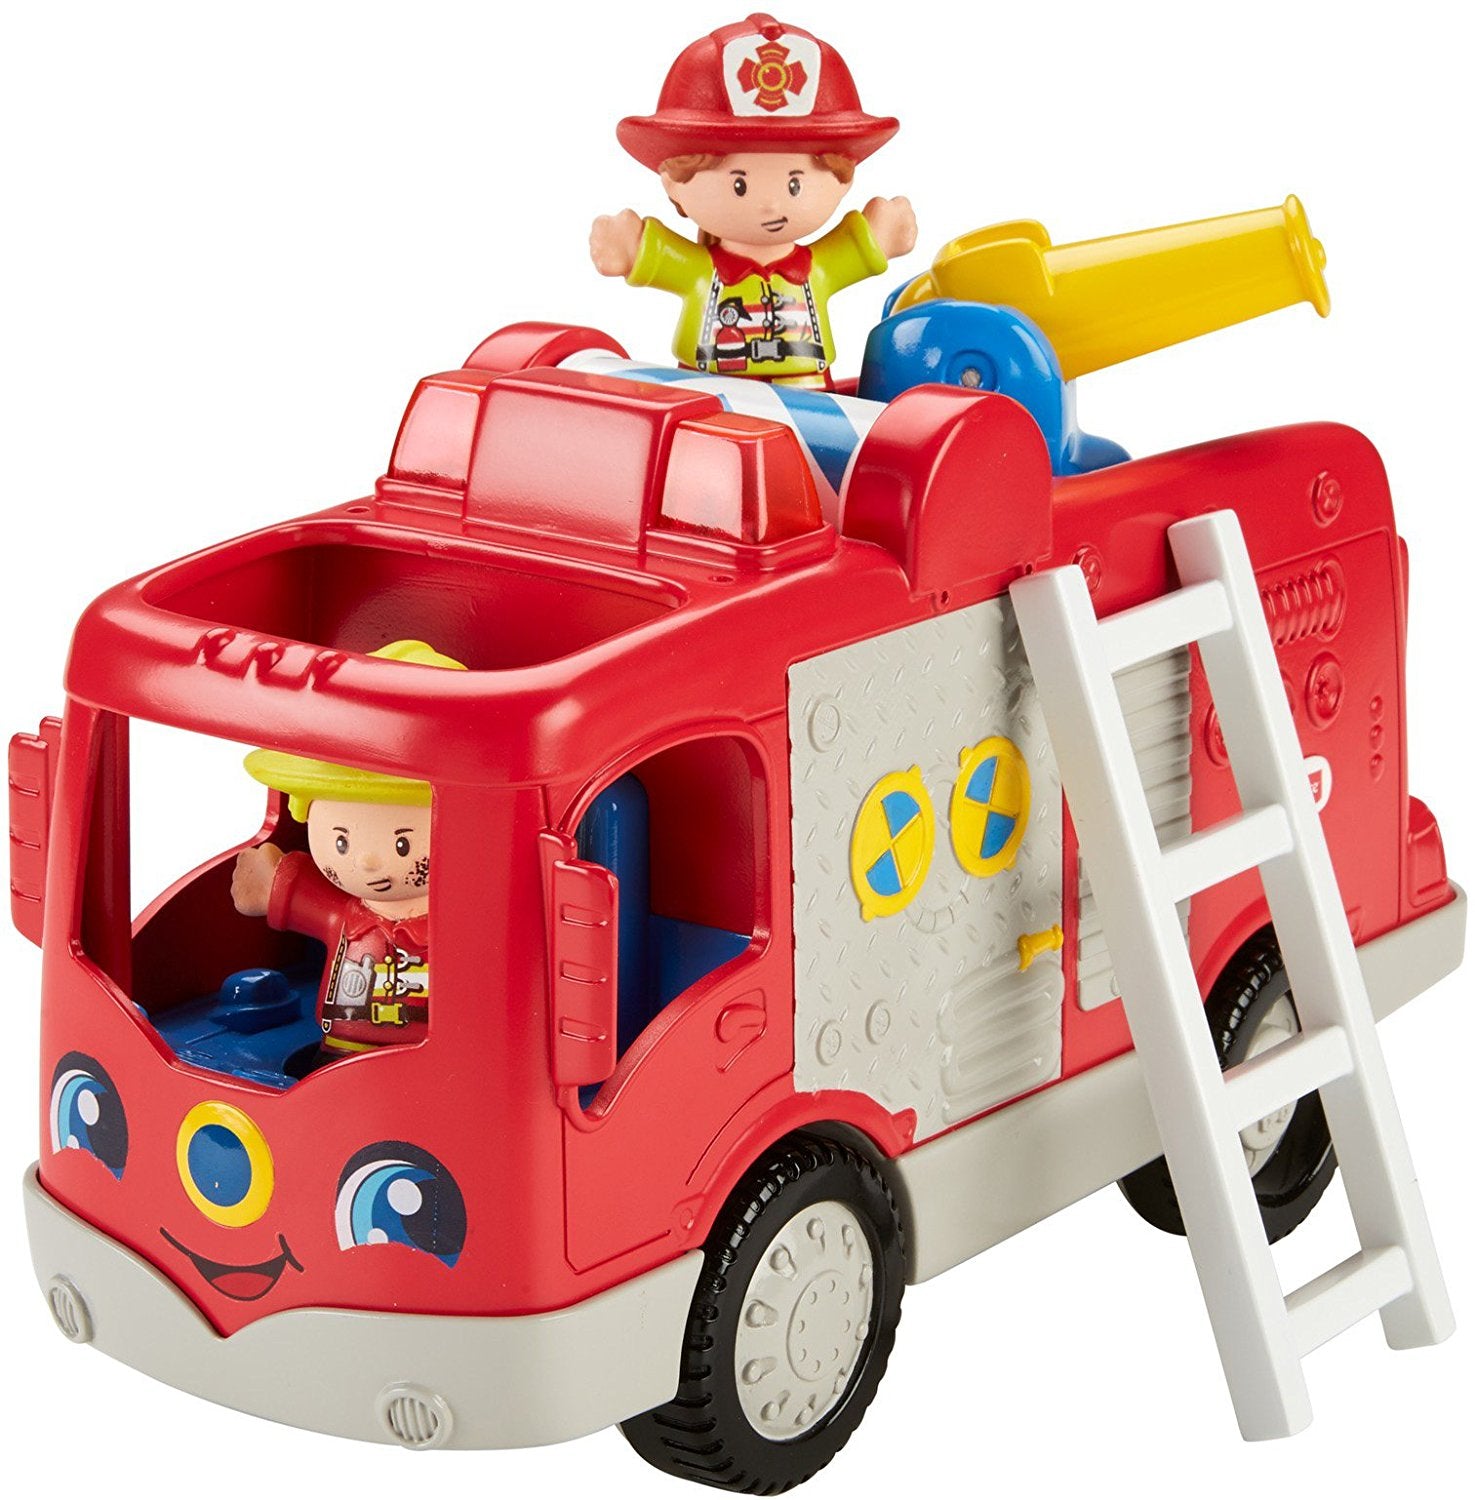 little people helping others fire truck